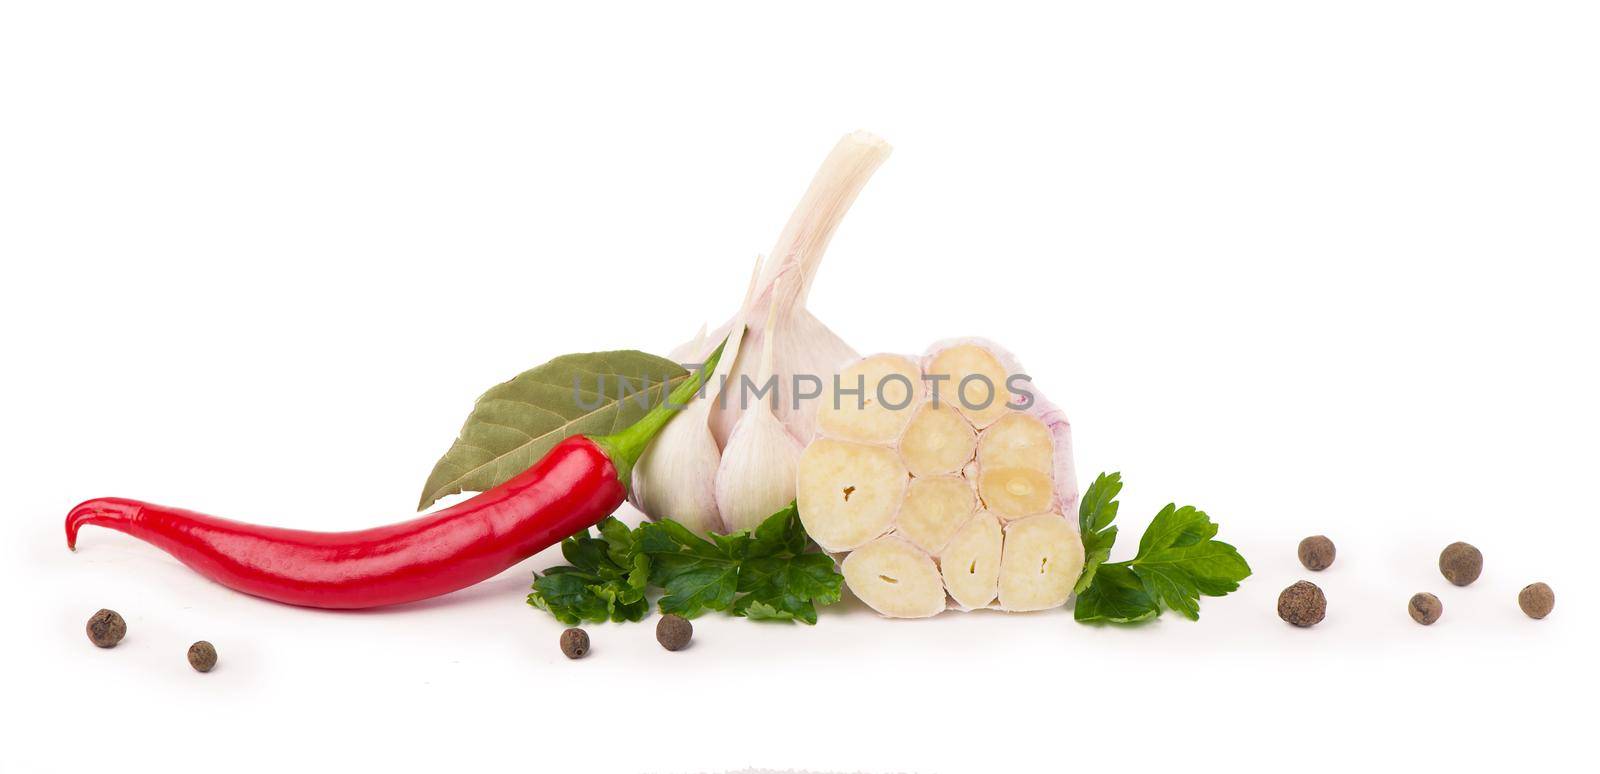 young garlic with cilantro and black peppercorns on a white background. Copy space.